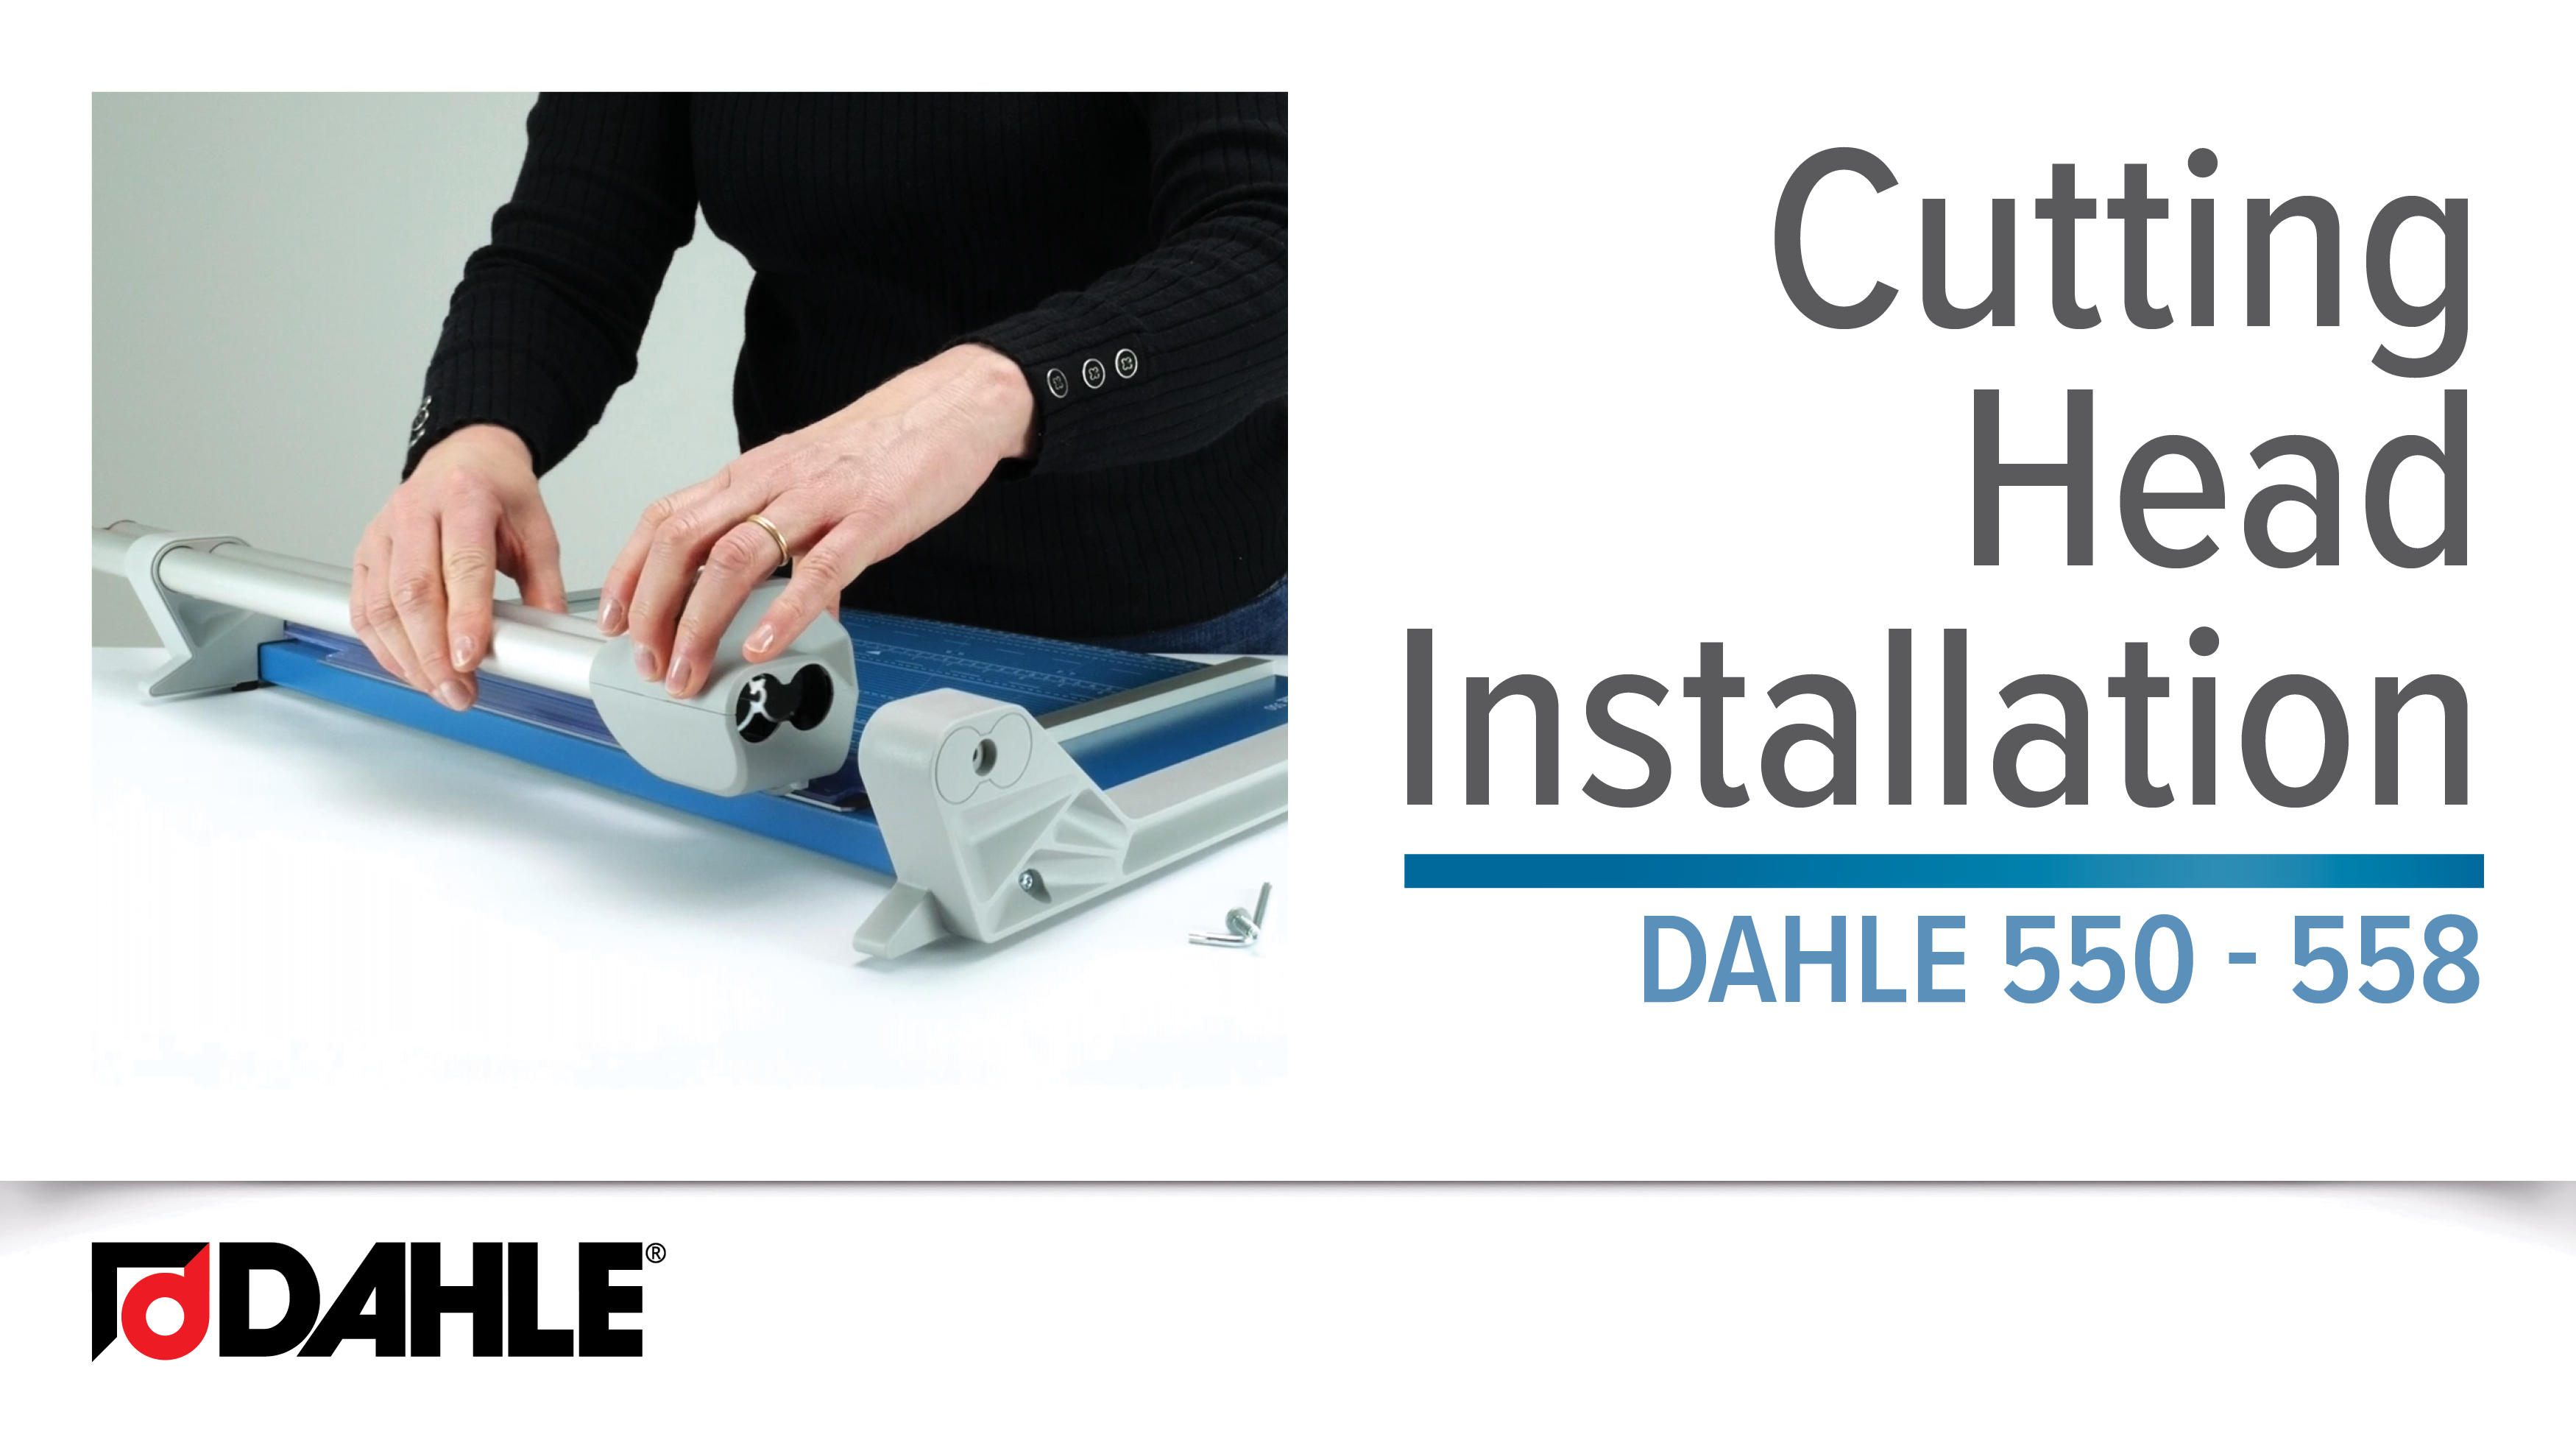 <big><strong>Dahle 552</strong></big>
<br>Professional Series